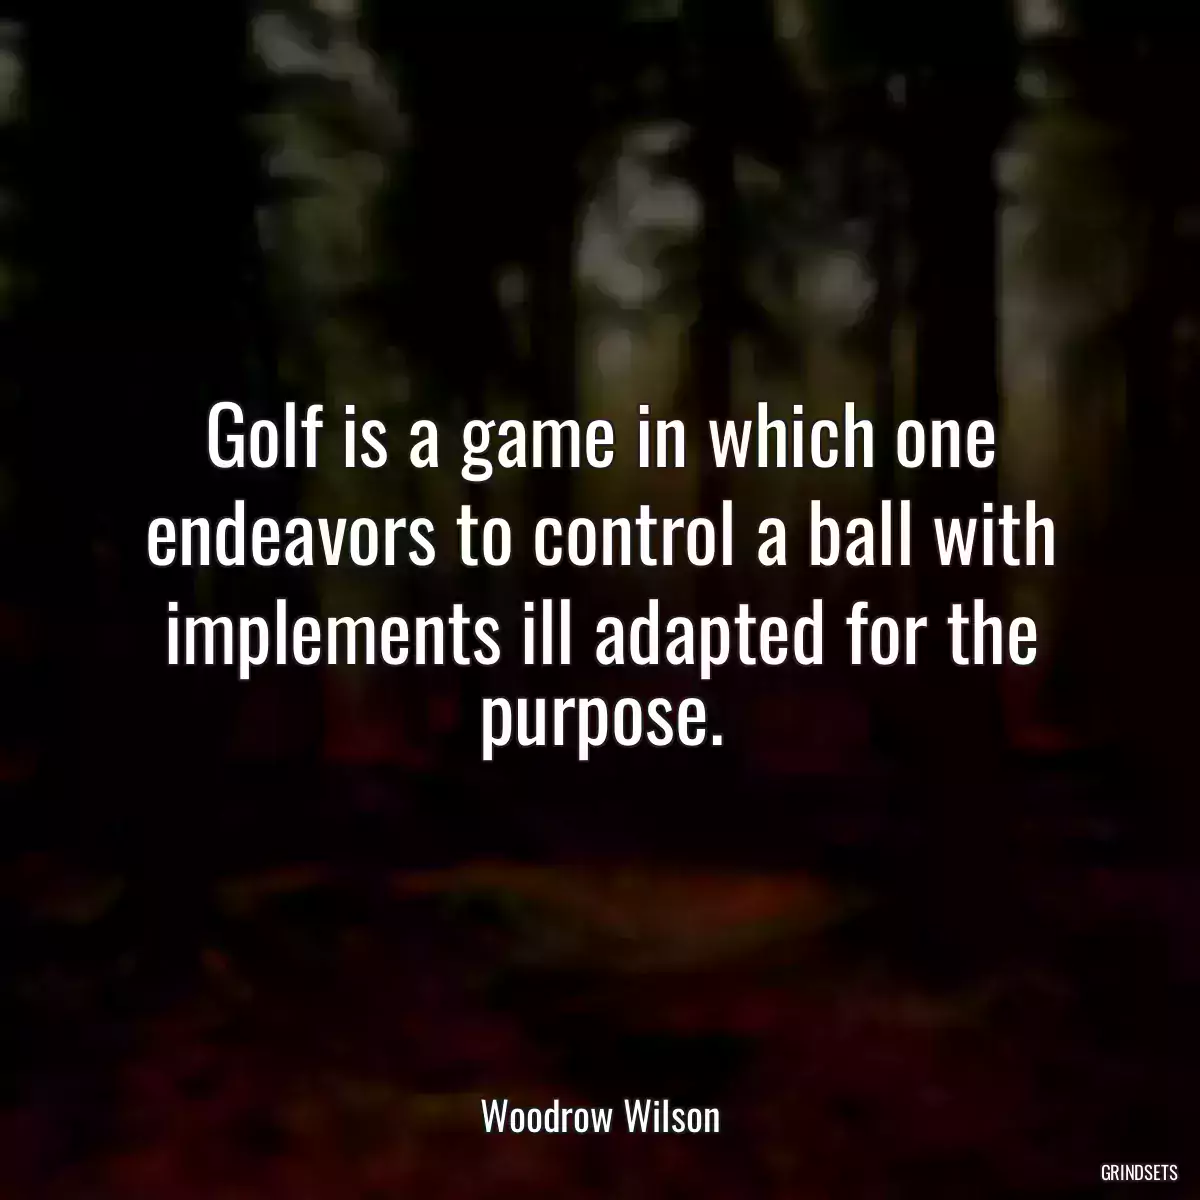 Golf is a game in which one endeavors to control a ball with implements ill adapted for the purpose.